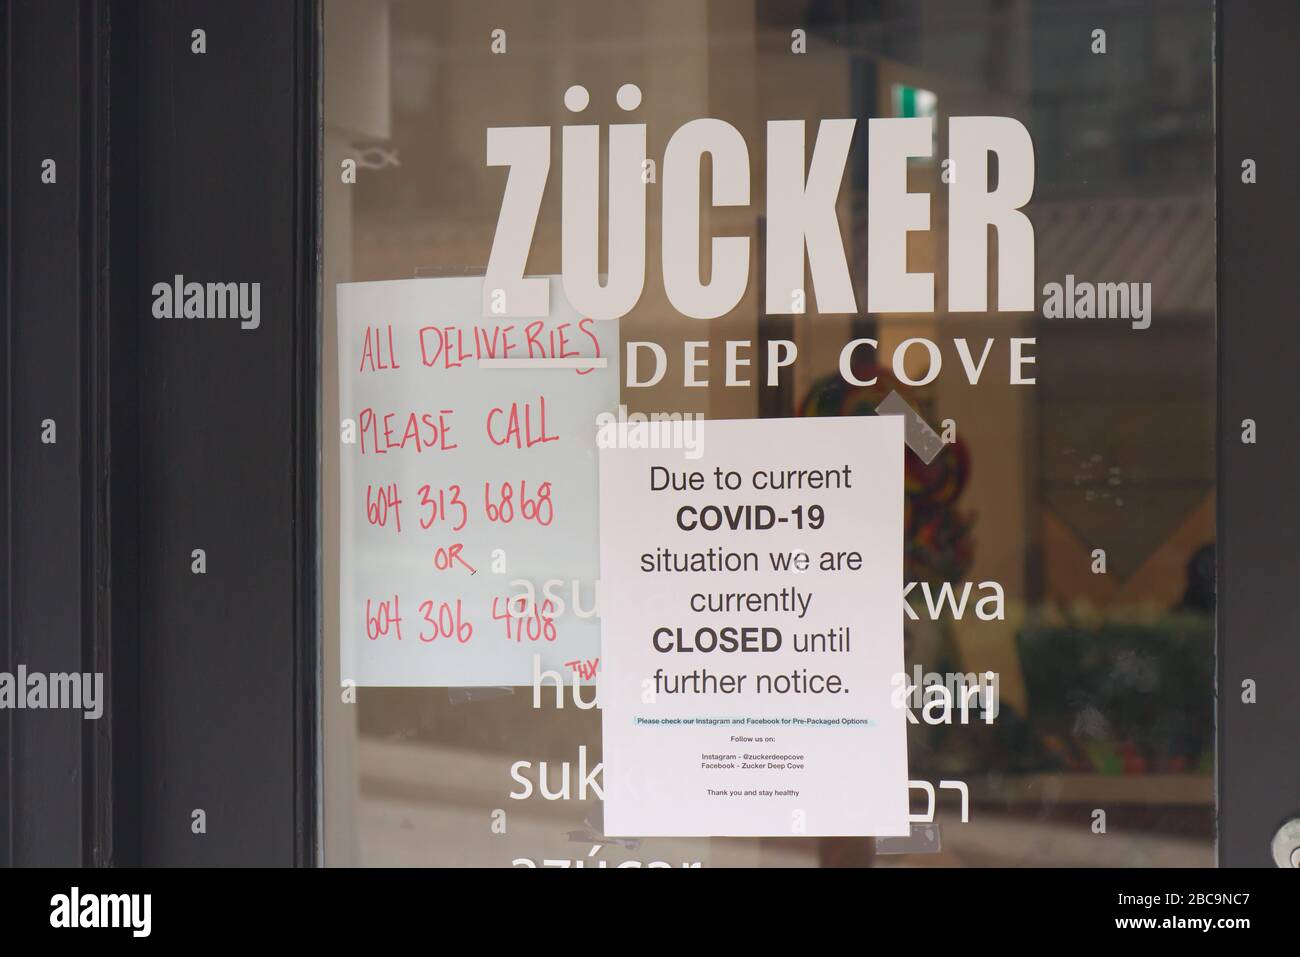 Deep Cove, North Vancouver, Canada - April 1, 2020: View of Zucker Treats Store  which have been closed due to COVID-19(coronavirus) Stock Photo